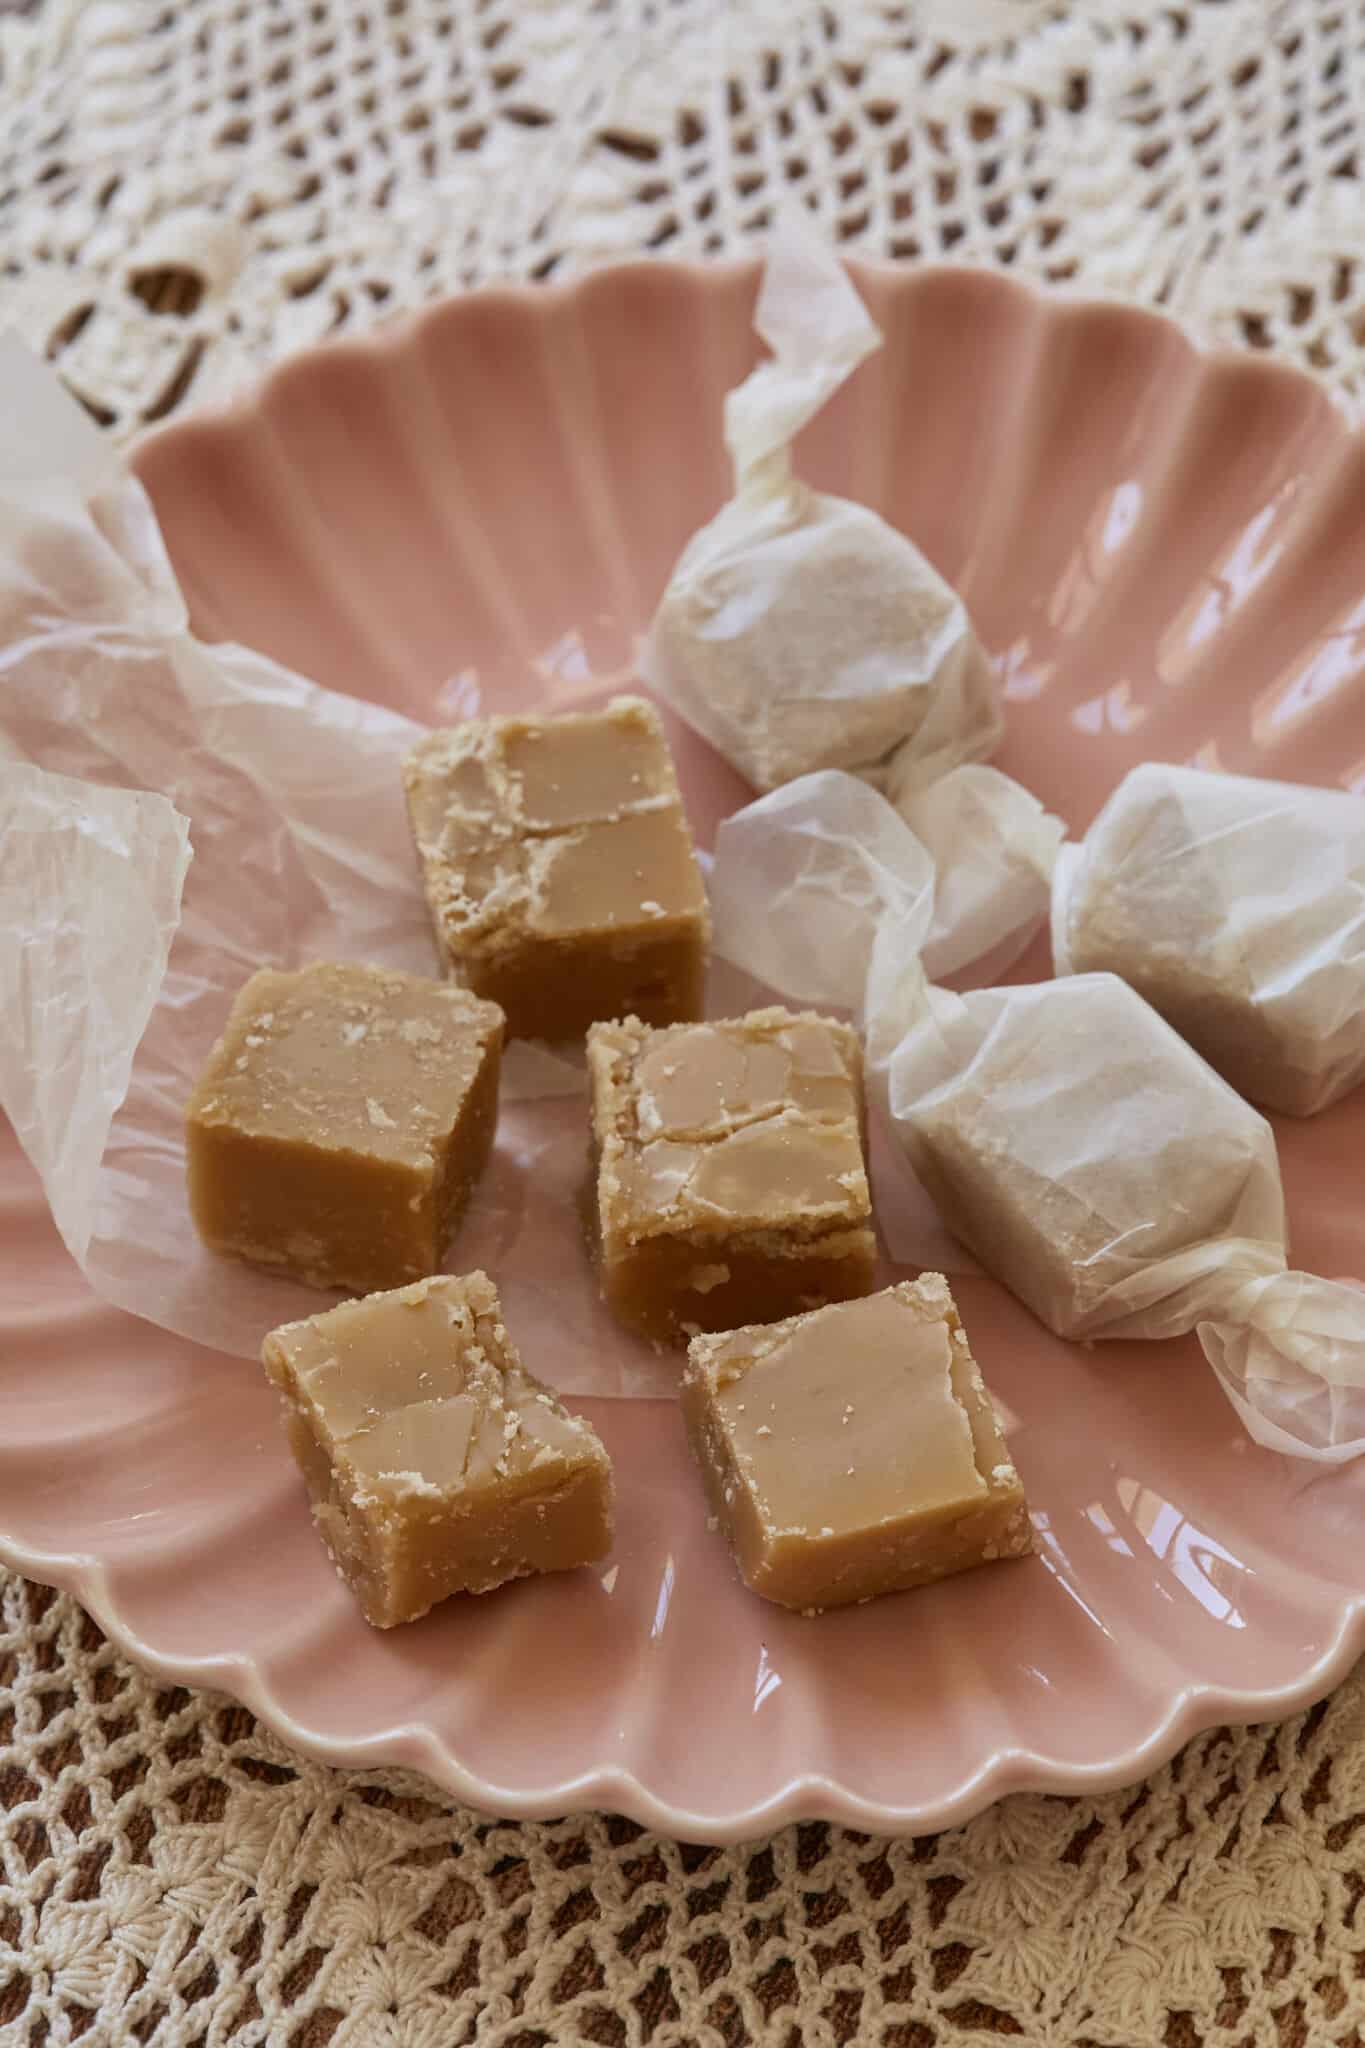 Square Pure Maple Candy is served on a pink dish wrapped in wax paper.